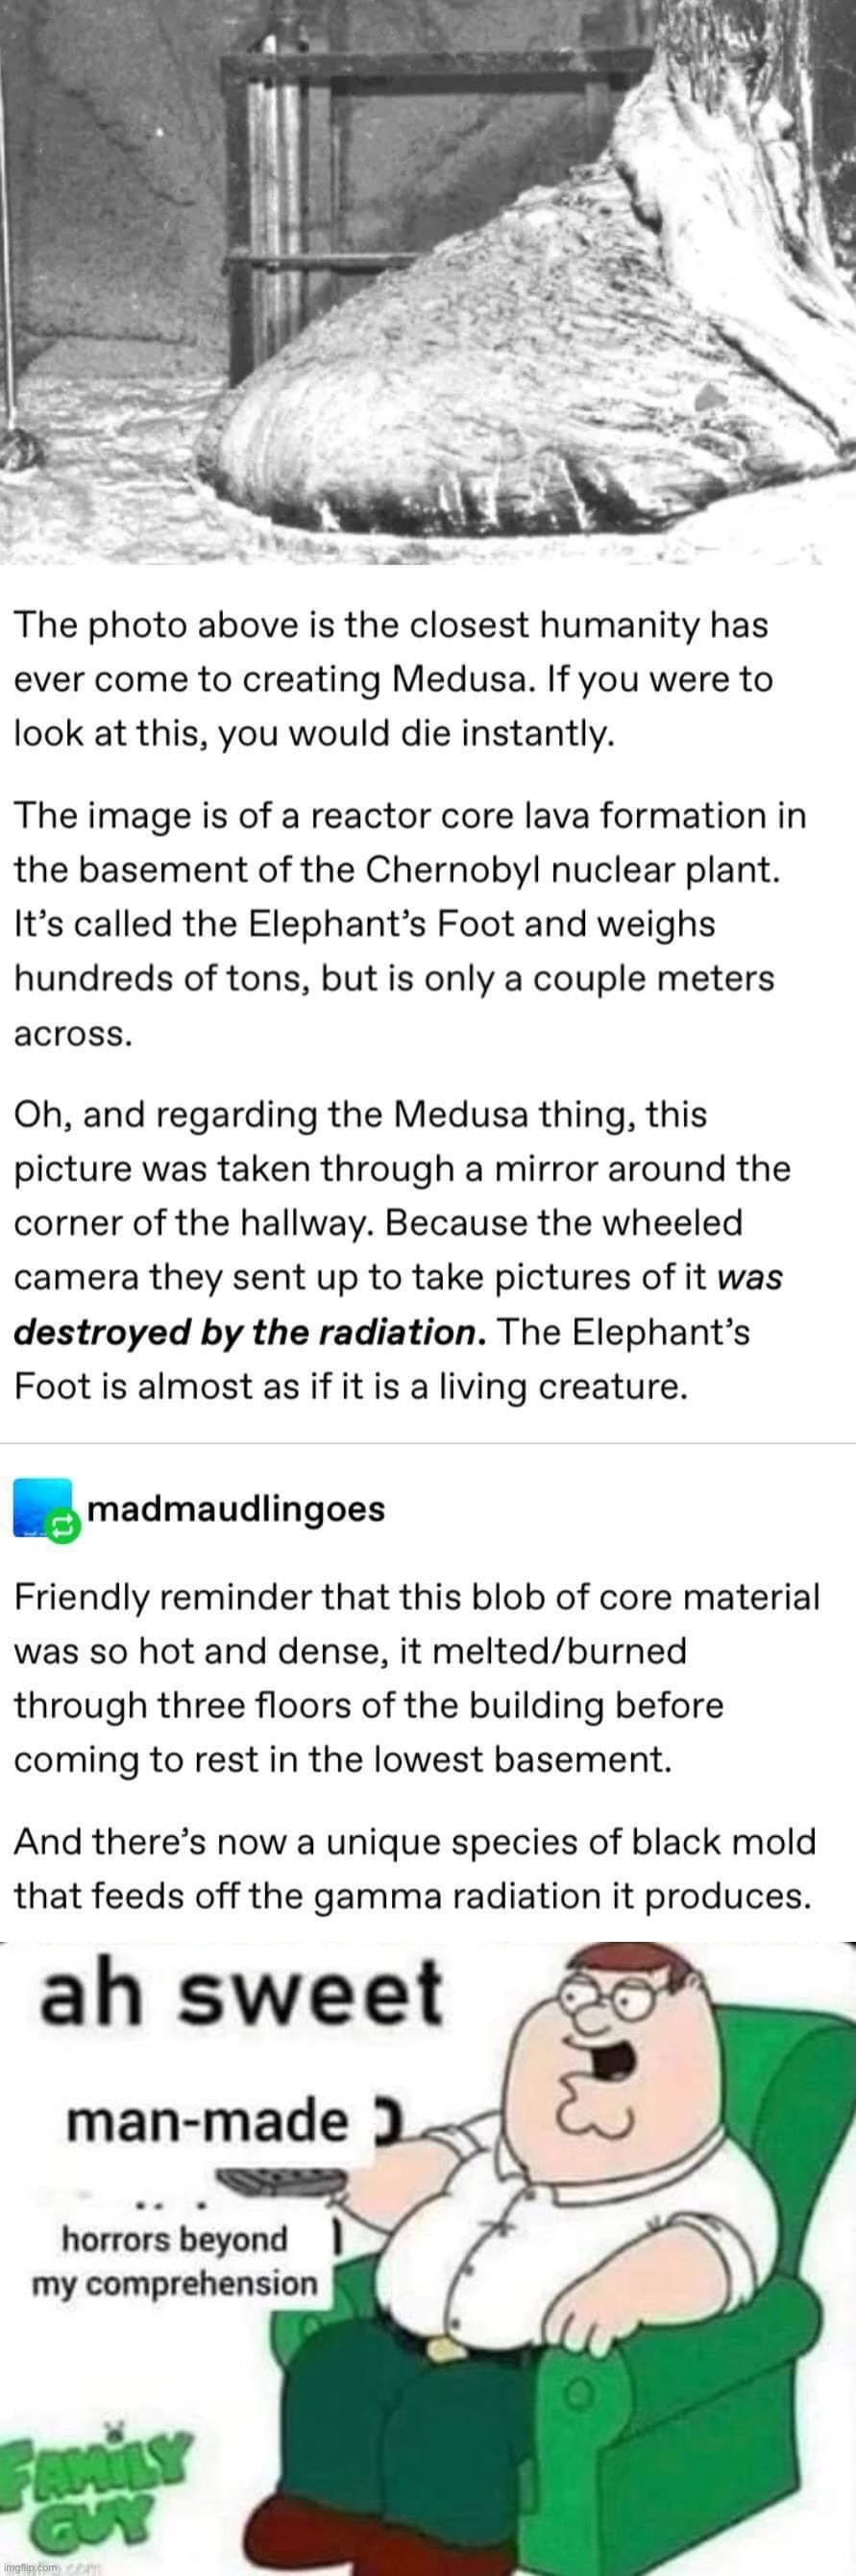 Ah yes, the Elephant’s Foot | image tagged in elephant s foot,ah sweet man-made horrors beyond my comprehension,radiation,nuclear,chernobyl,nope | made w/ Imgflip meme maker